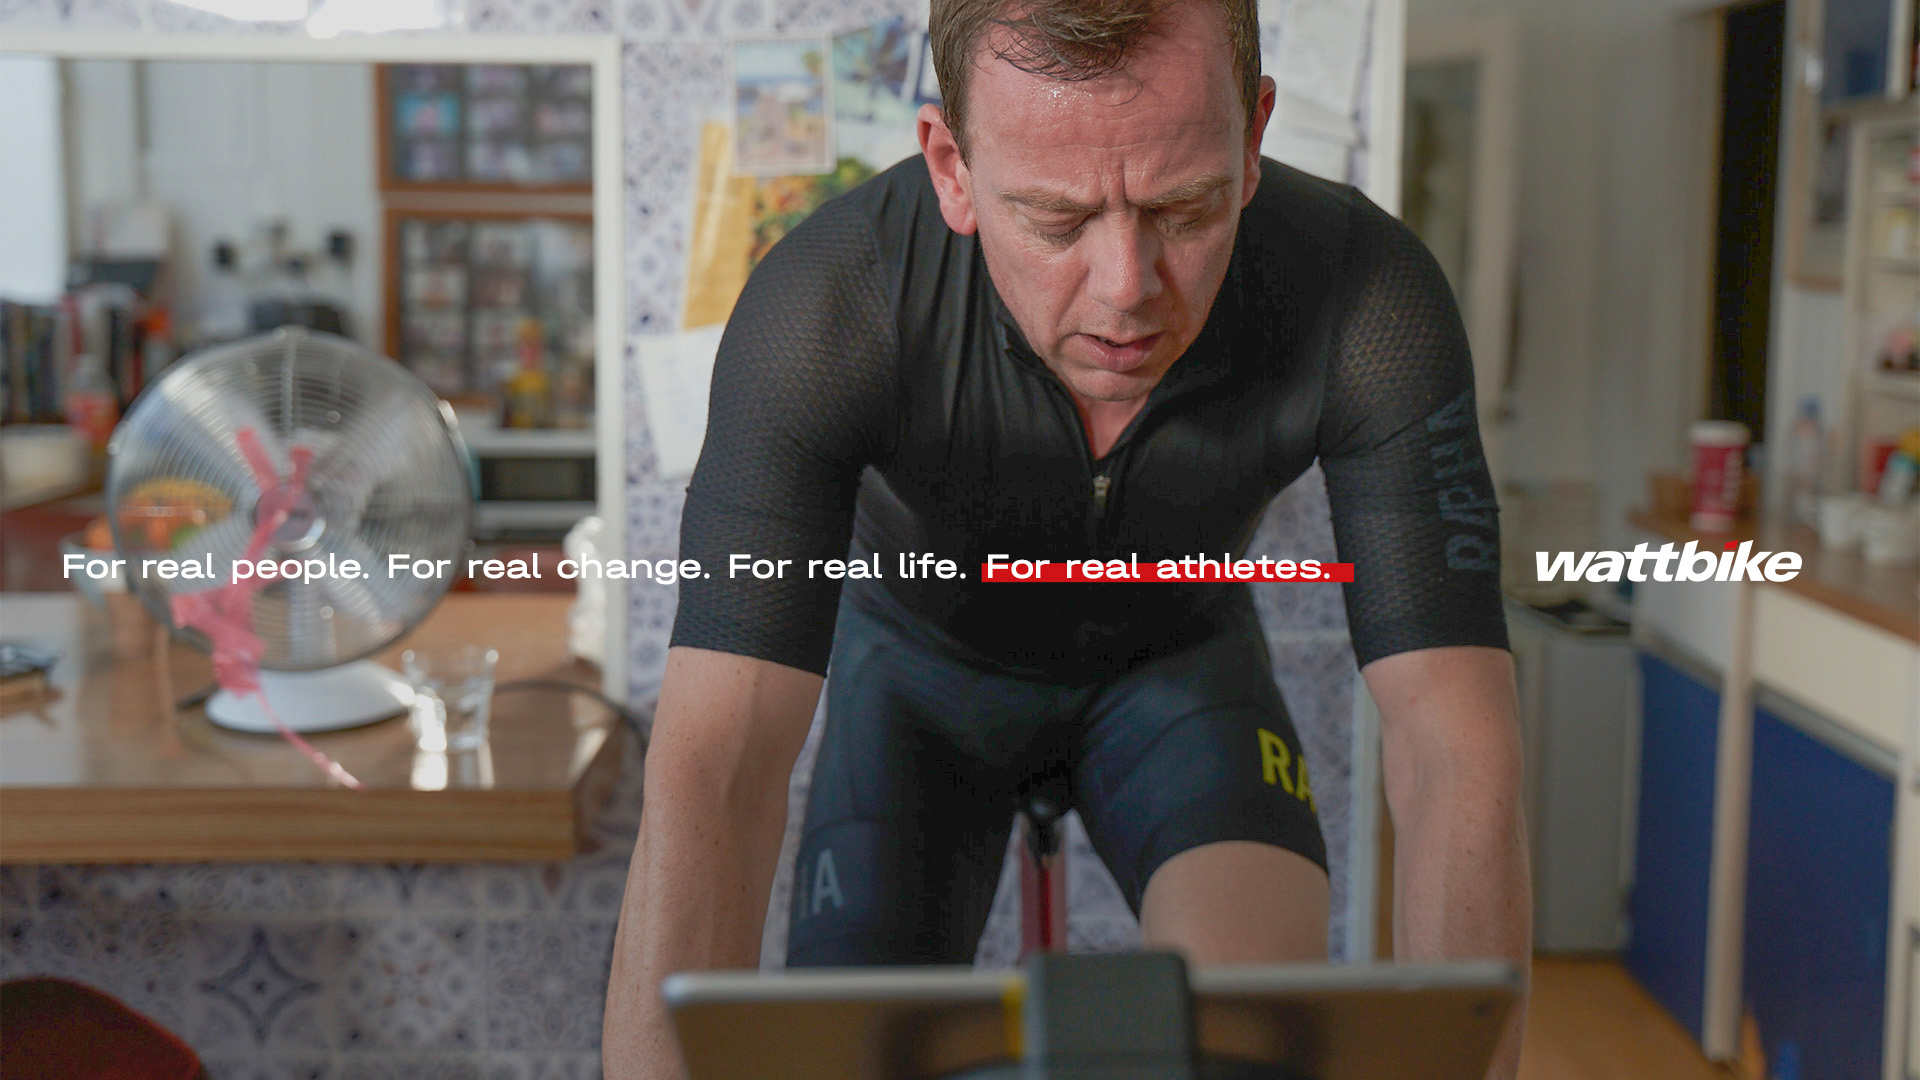 A man sitting on a Wattbike in his kitchen looking tired from his workout. A title on screen reads: “For real people. For real change. For real life. For real athletes.”, alongside the Wattbike logo.